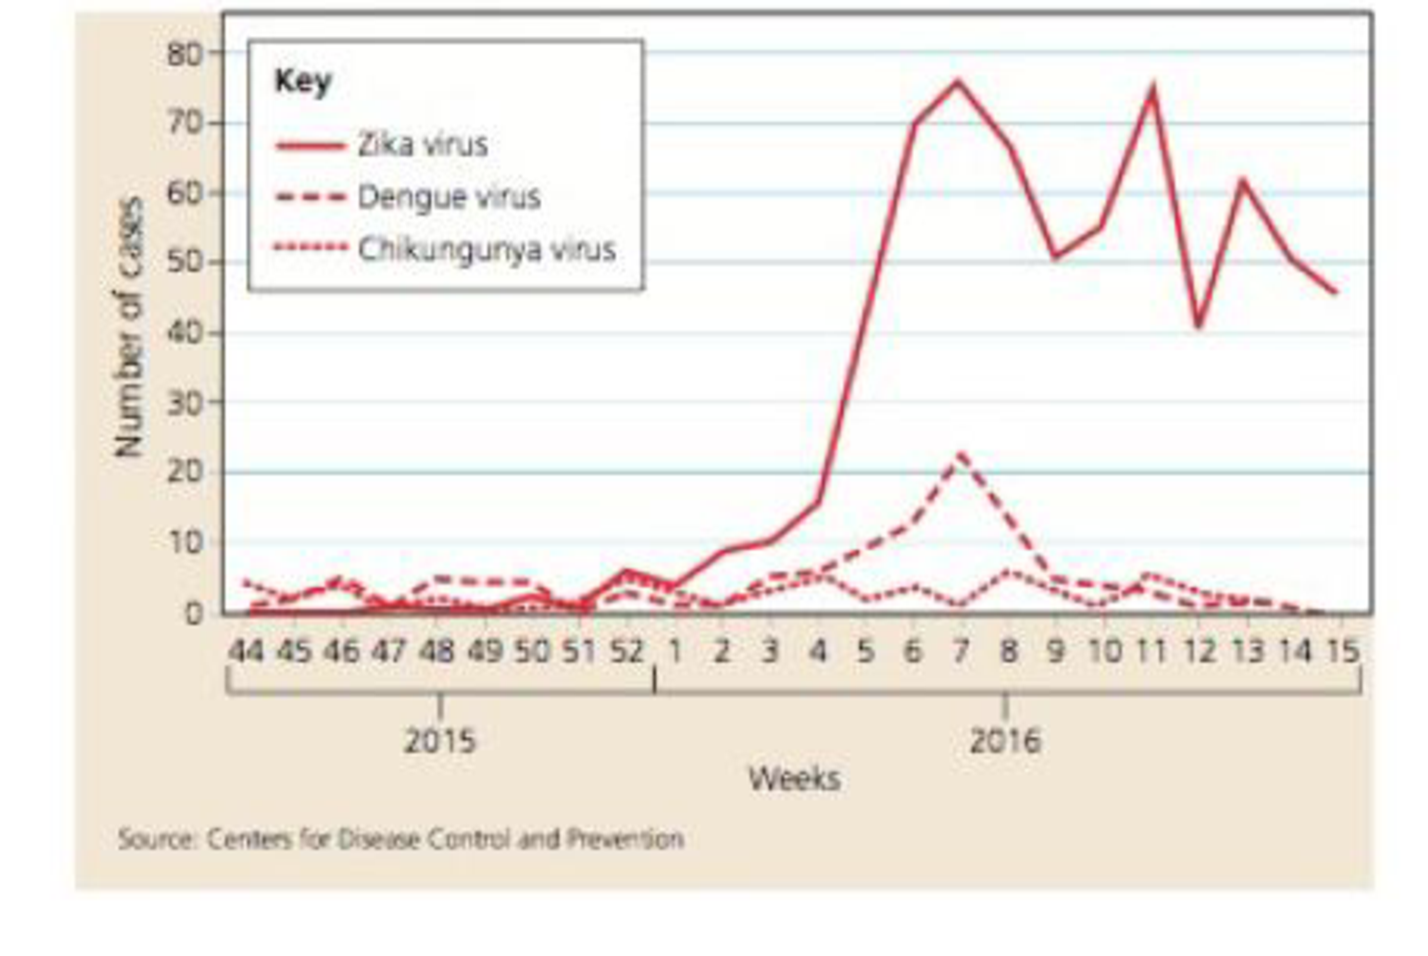 Chapter 10, Problem 17PS, Interpreting Data The graph shows the number of cases per week of Zika, Dengue, and Chikungunya 